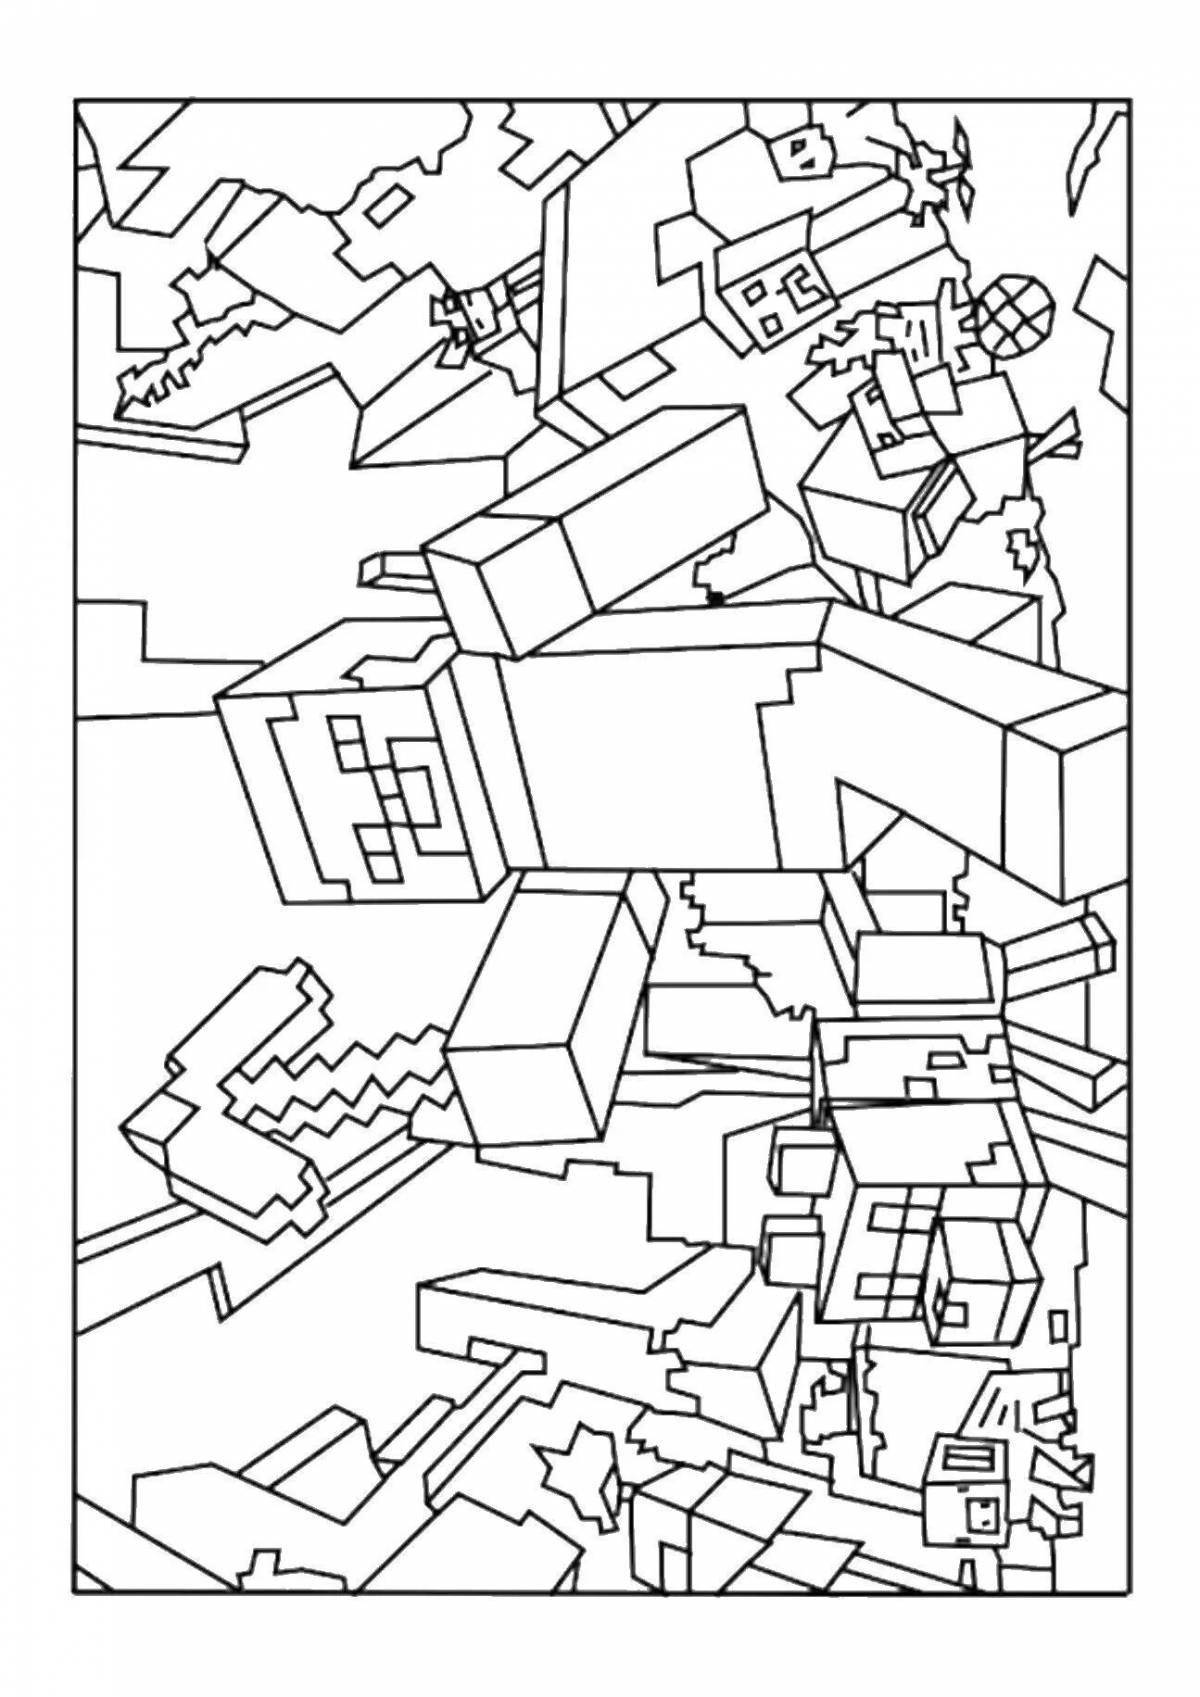 Fascinating minecraft math coloring book